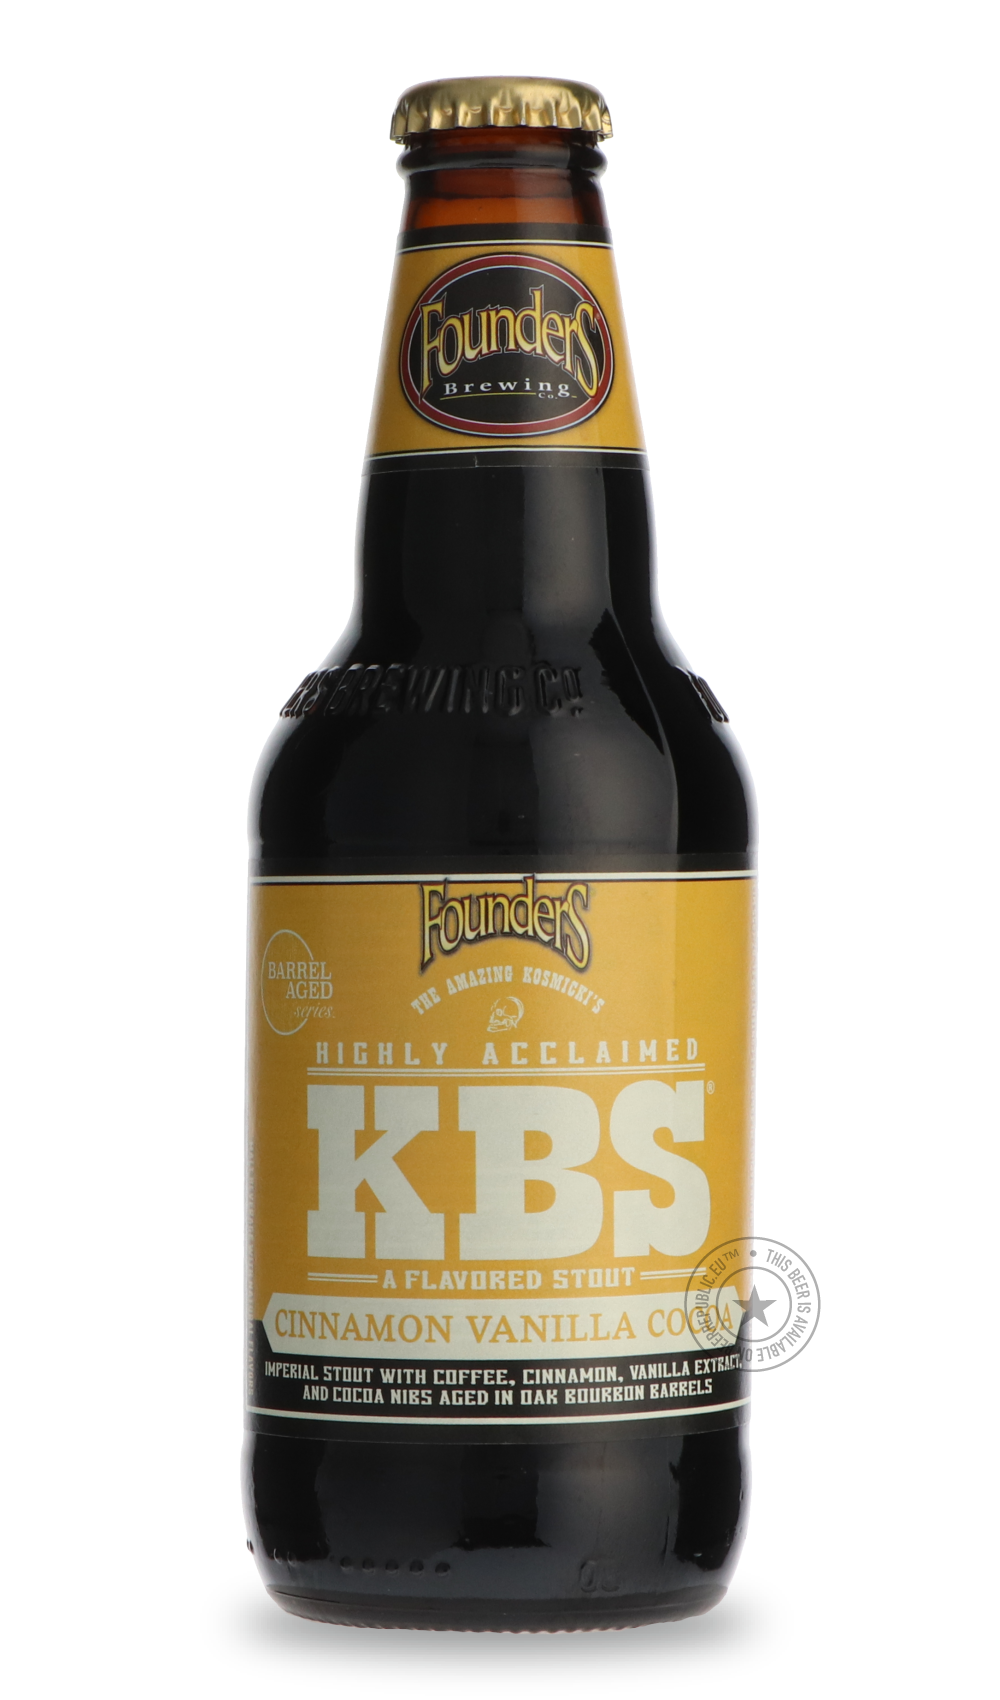 -Founders- KBS Cinnamon Vanilla Cocoa-Stout & Porter- Only @ Beer Republic - The best online beer store for American & Canadian craft beer - Buy beer online from the USA and Canada - Bier online kopen - Amerikaans bier kopen - Craft beer store - Craft beer kopen - Amerikanisch bier kaufen - Bier online kaufen - Acheter biere online - IPA - Stout - Porter - New England IPA - Hazy IPA - Imperial Stout - Barrel Aged - Barrel Aged Imperial Stout - Brown - Dark beer - Blond - Blonde - Pilsner - Lager - Wheat - W